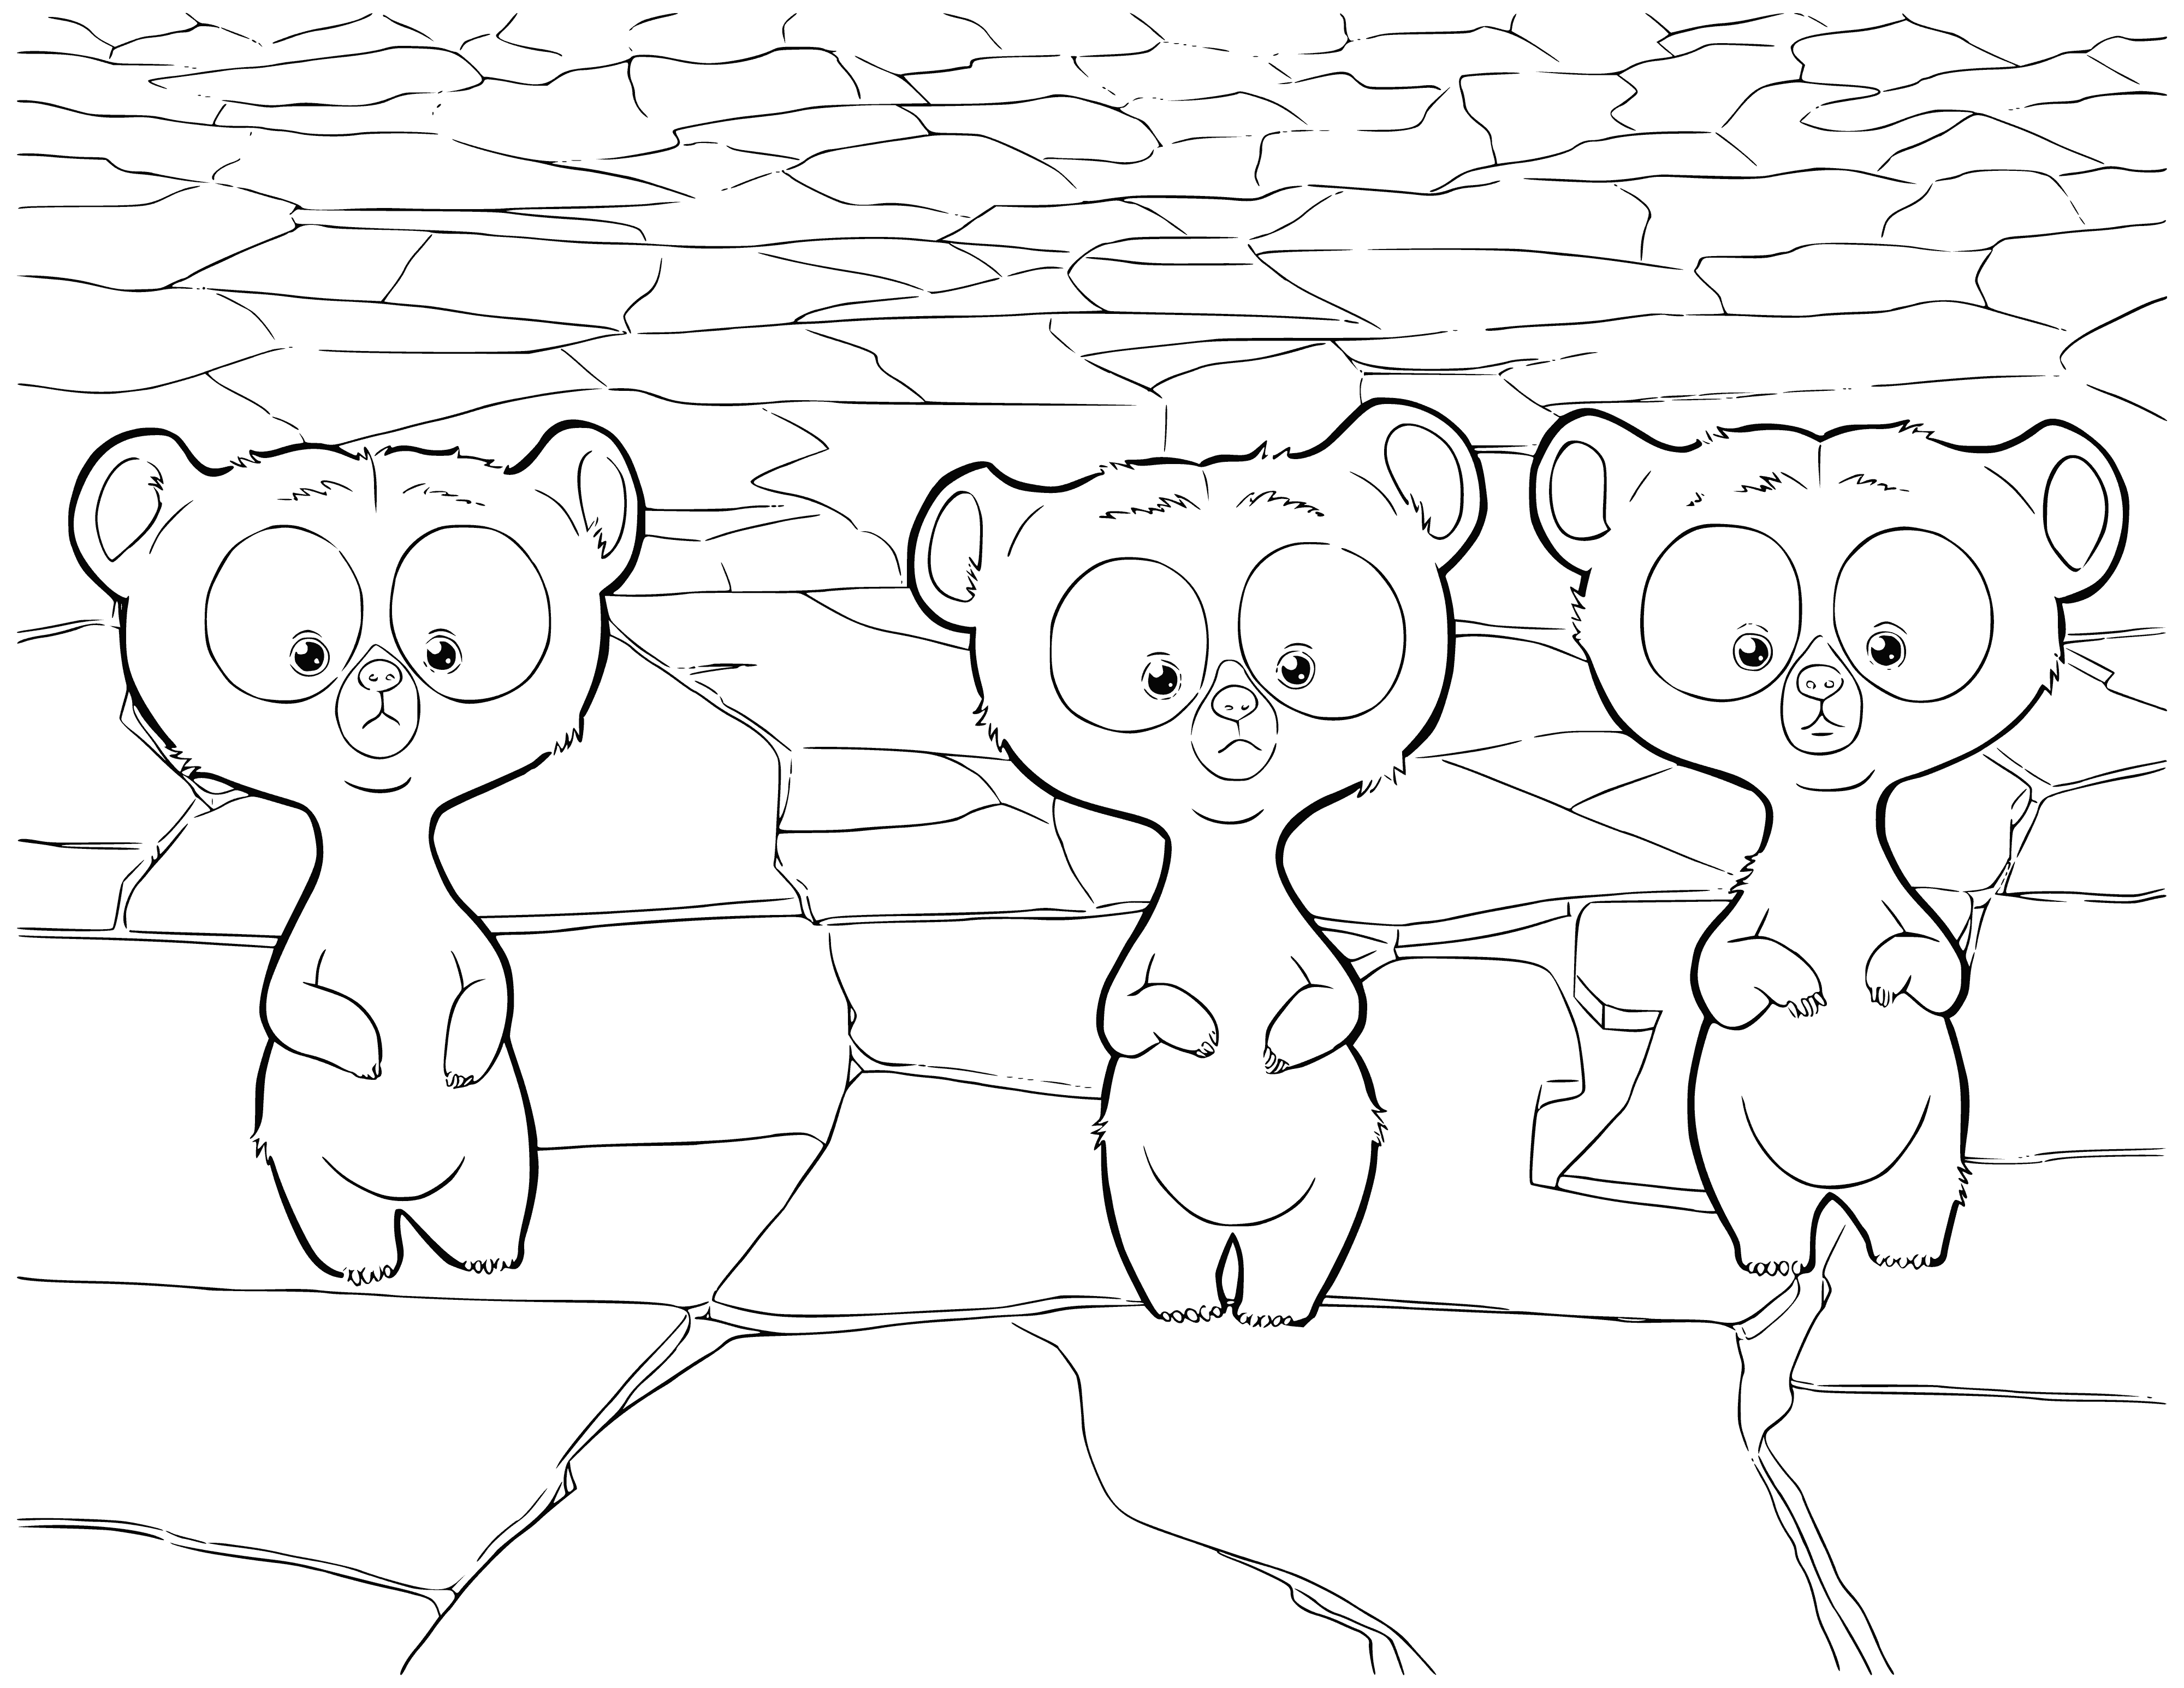 coloring page: 3 boys with bear bodies explore a thick forest, near a castle.